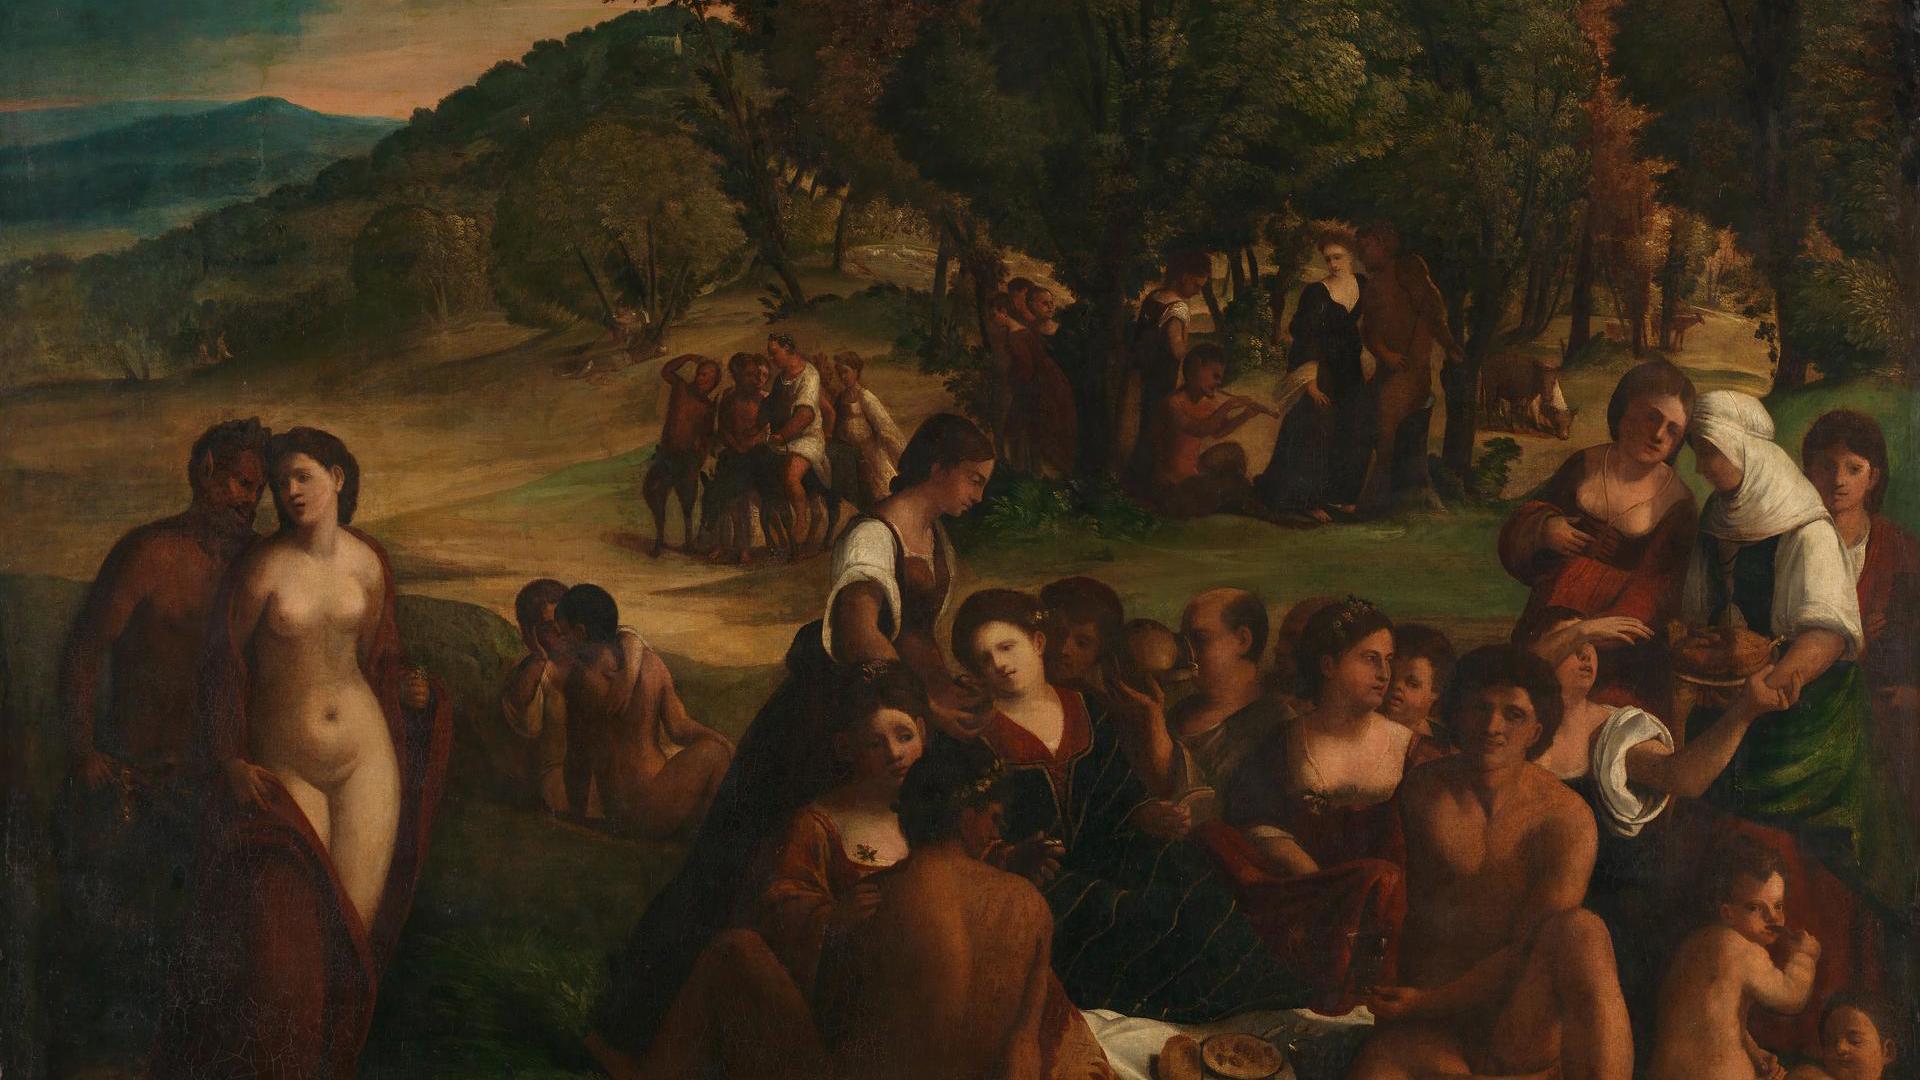 A Bacchanal by Follower of Dosso Dossi